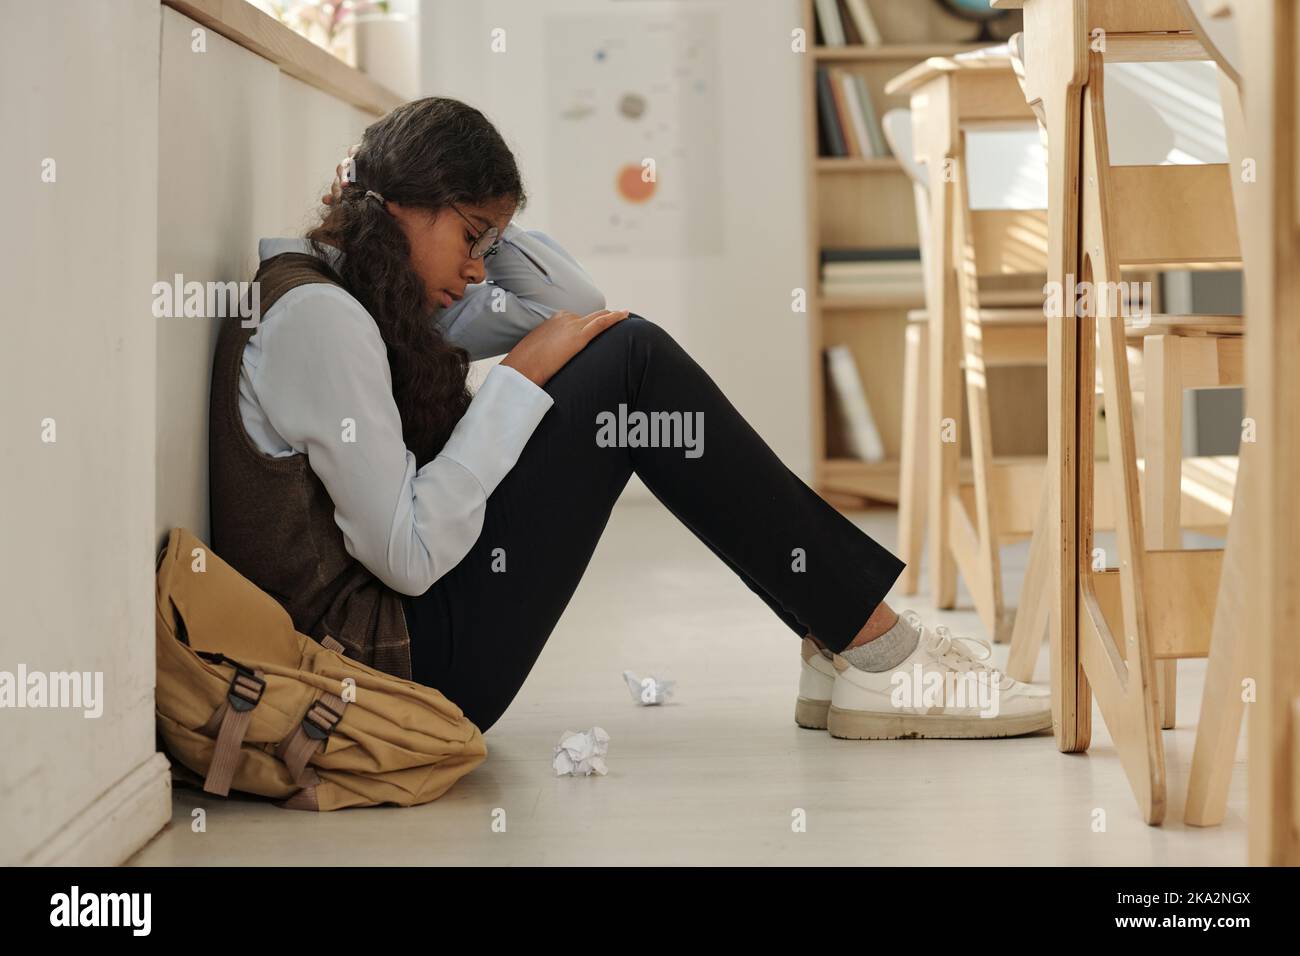 Girl feeling sad and lonely while sitting on the floor alone Stock